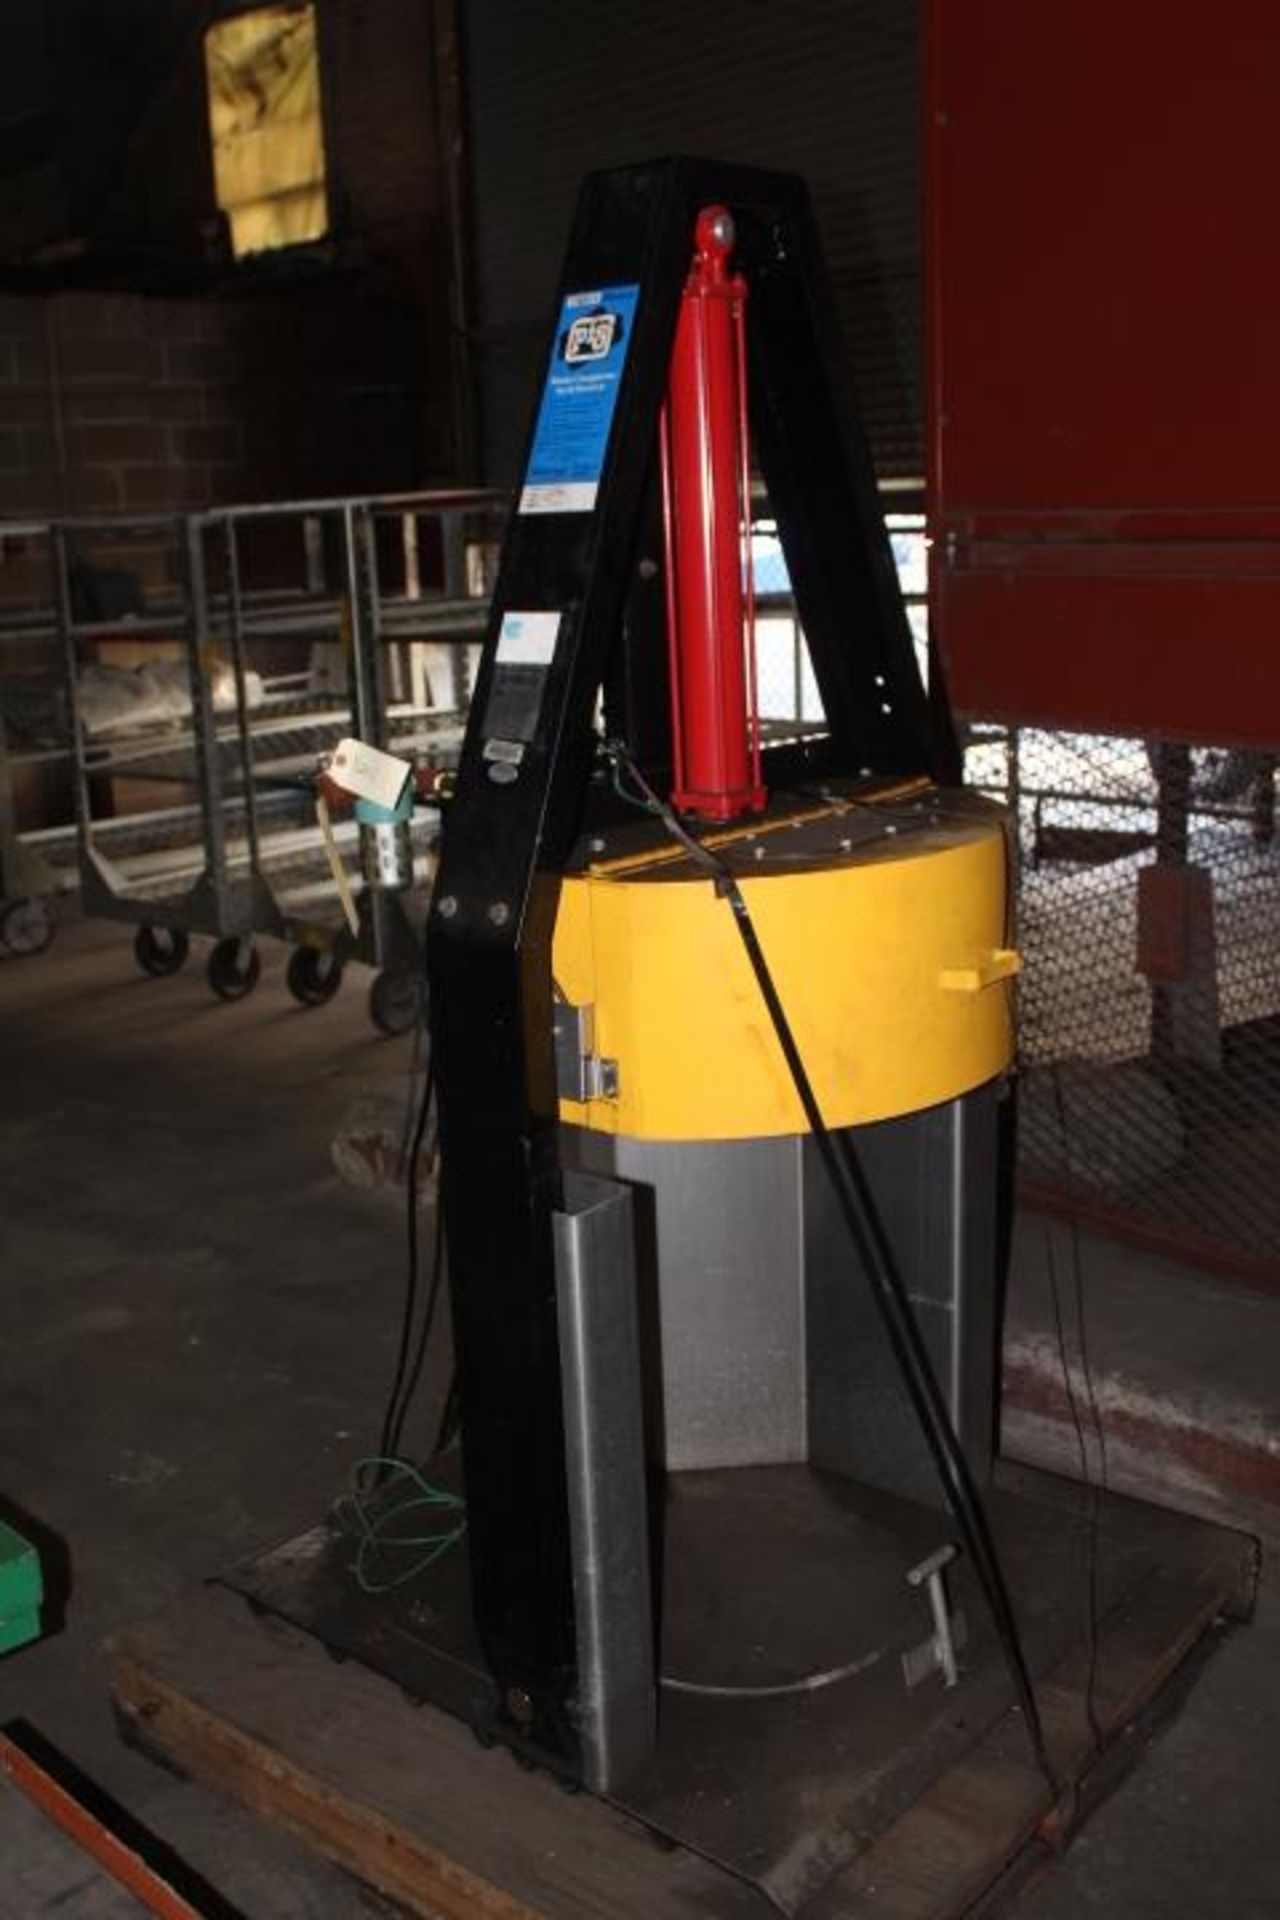 PIG DRM655 WASTE COMPACTOR FOR FLAMMABLE LIQUID WASTE, SPARK RESISTANT, CRUSH 12,000 LB OF FORCE - Image 3 of 4